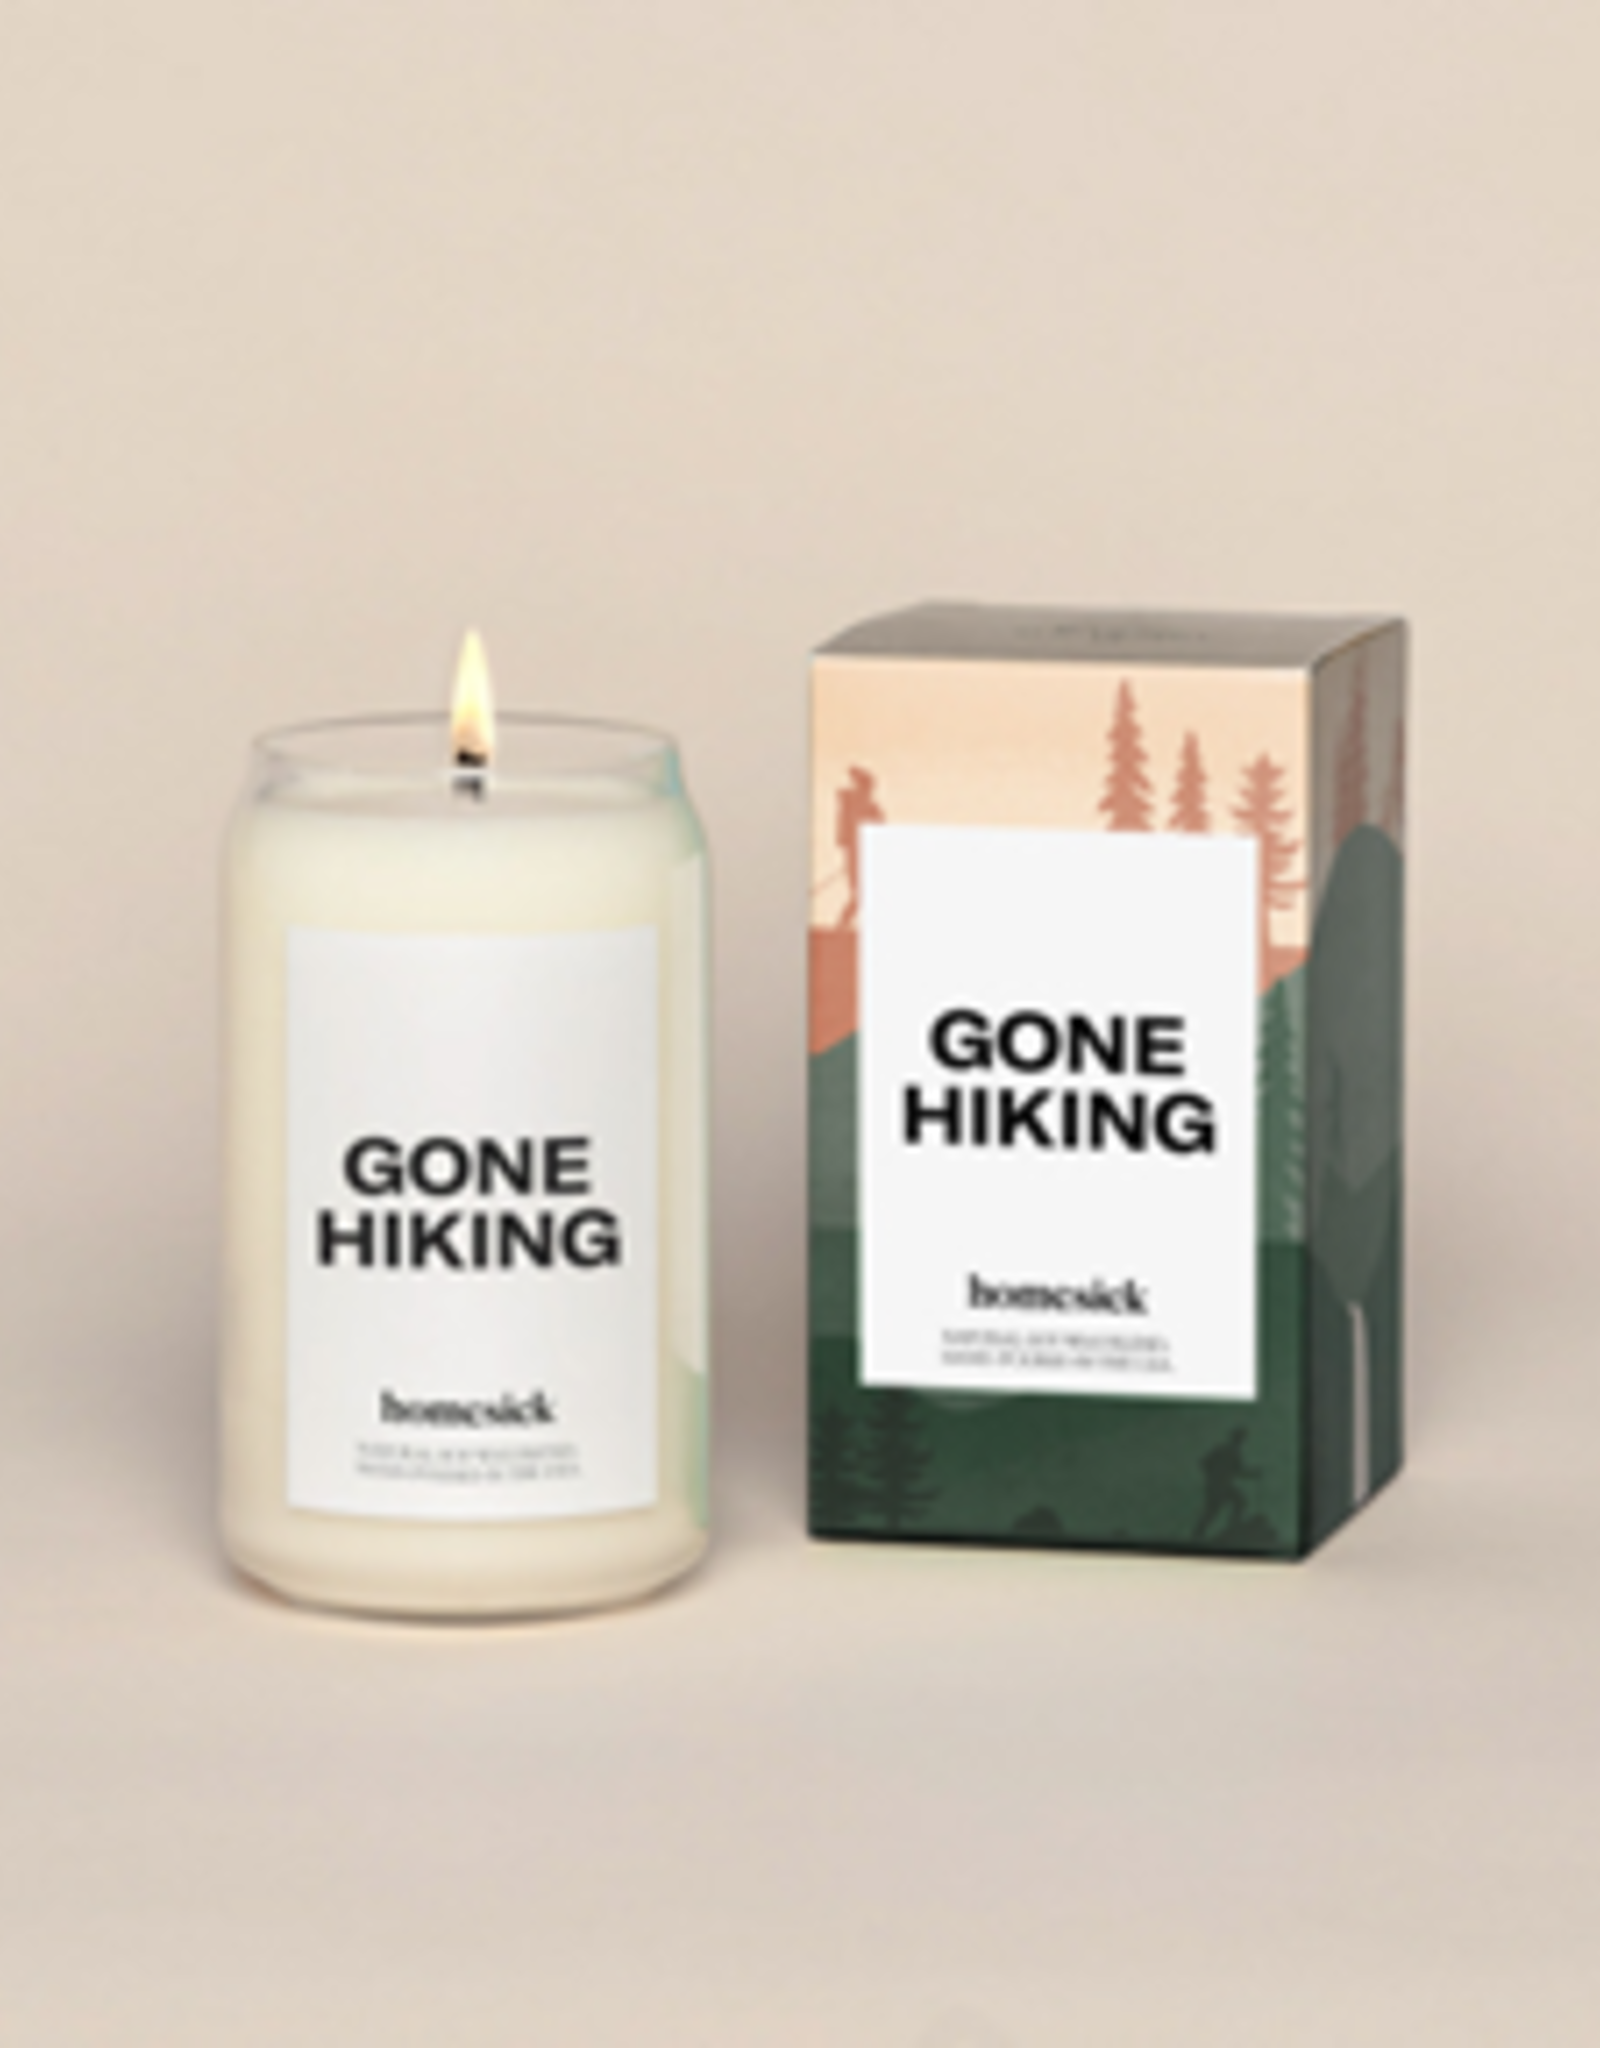 Homesick Candles Gone Hiking Candle